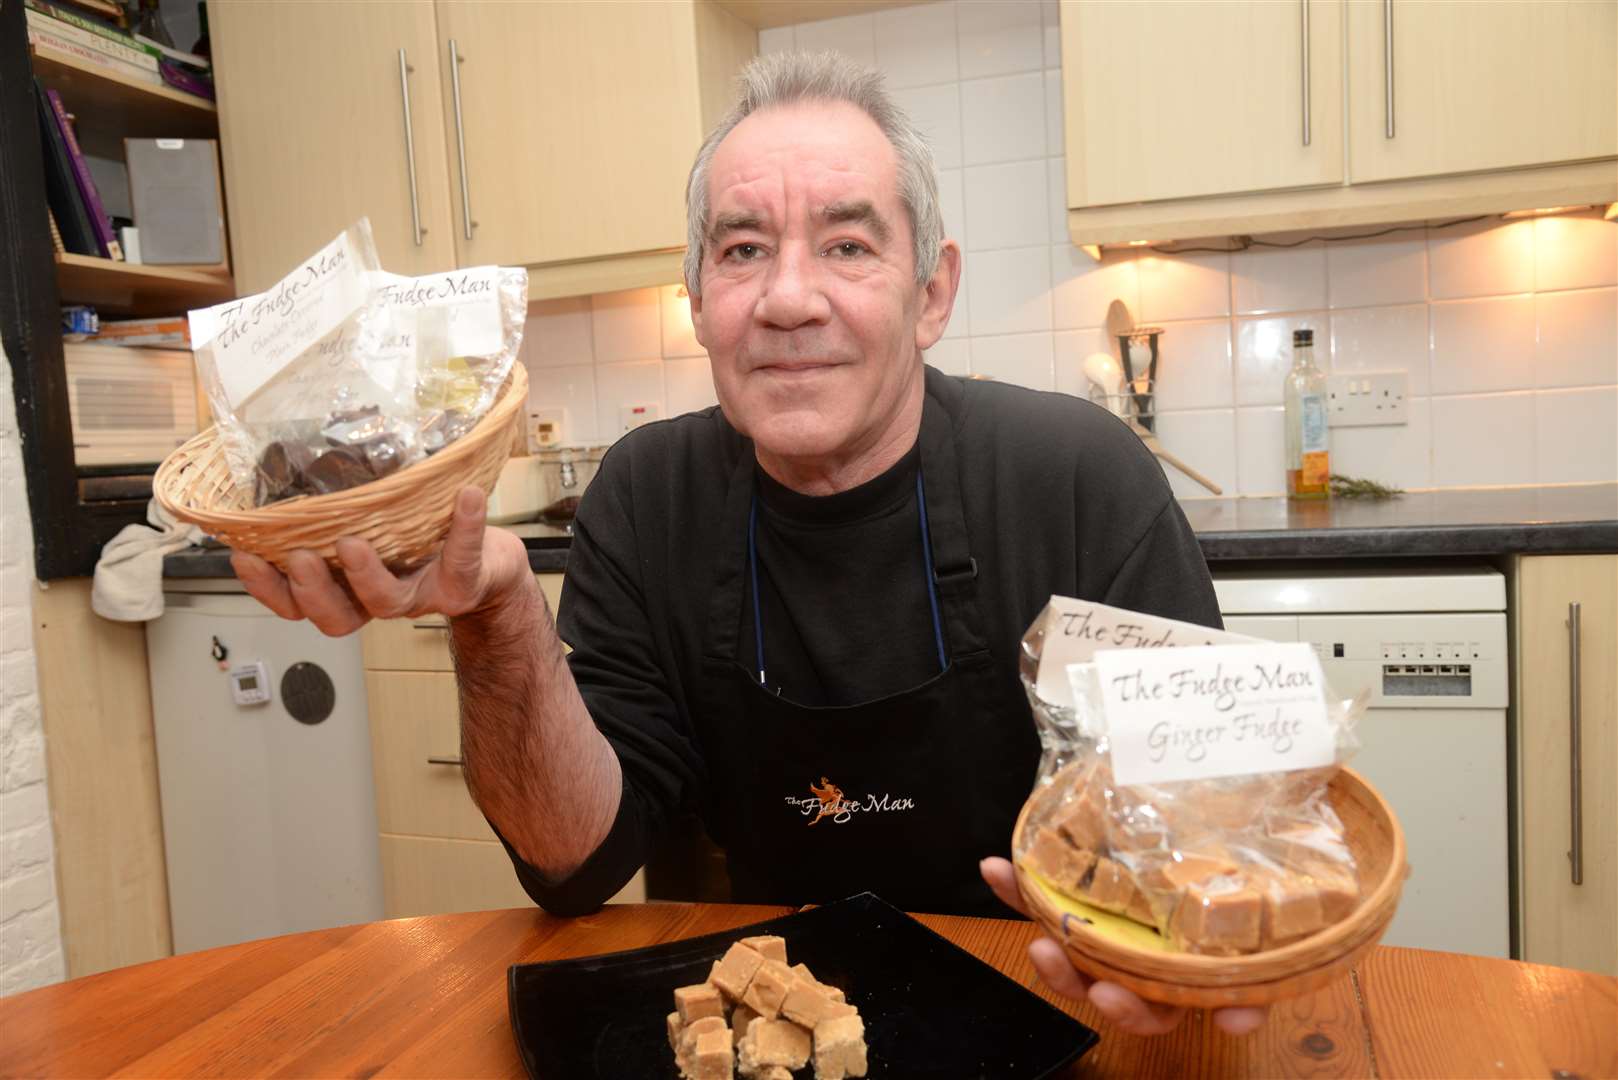 Dover fudge maker Steve Timms of Queens Gardens who has featured in a BBC documentary on small food businesses